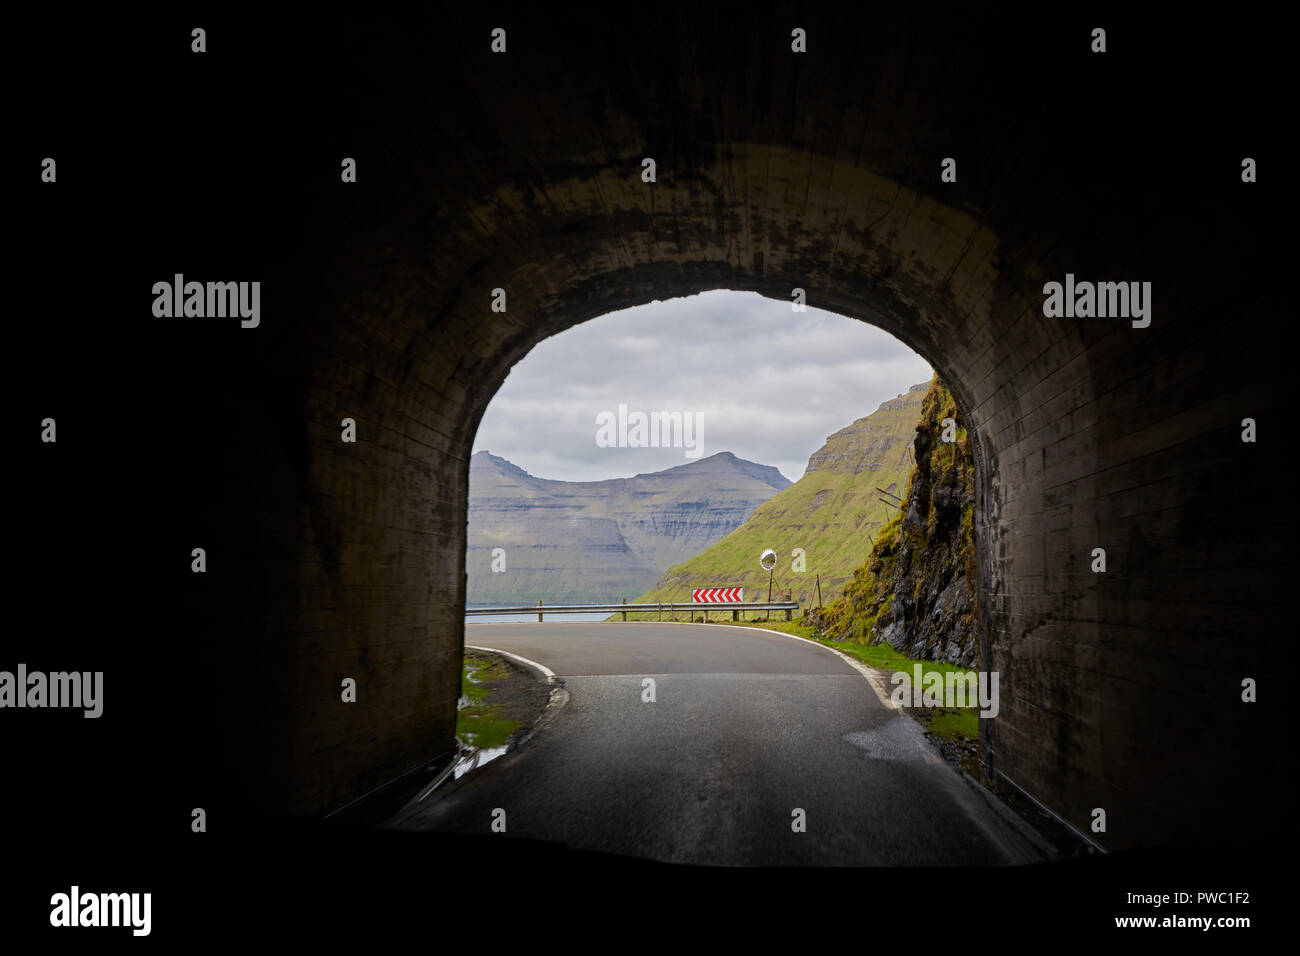 Exiting Tunnel on Route 70 on Bordoy Island in Faroe Islands Faroes Stock Photo